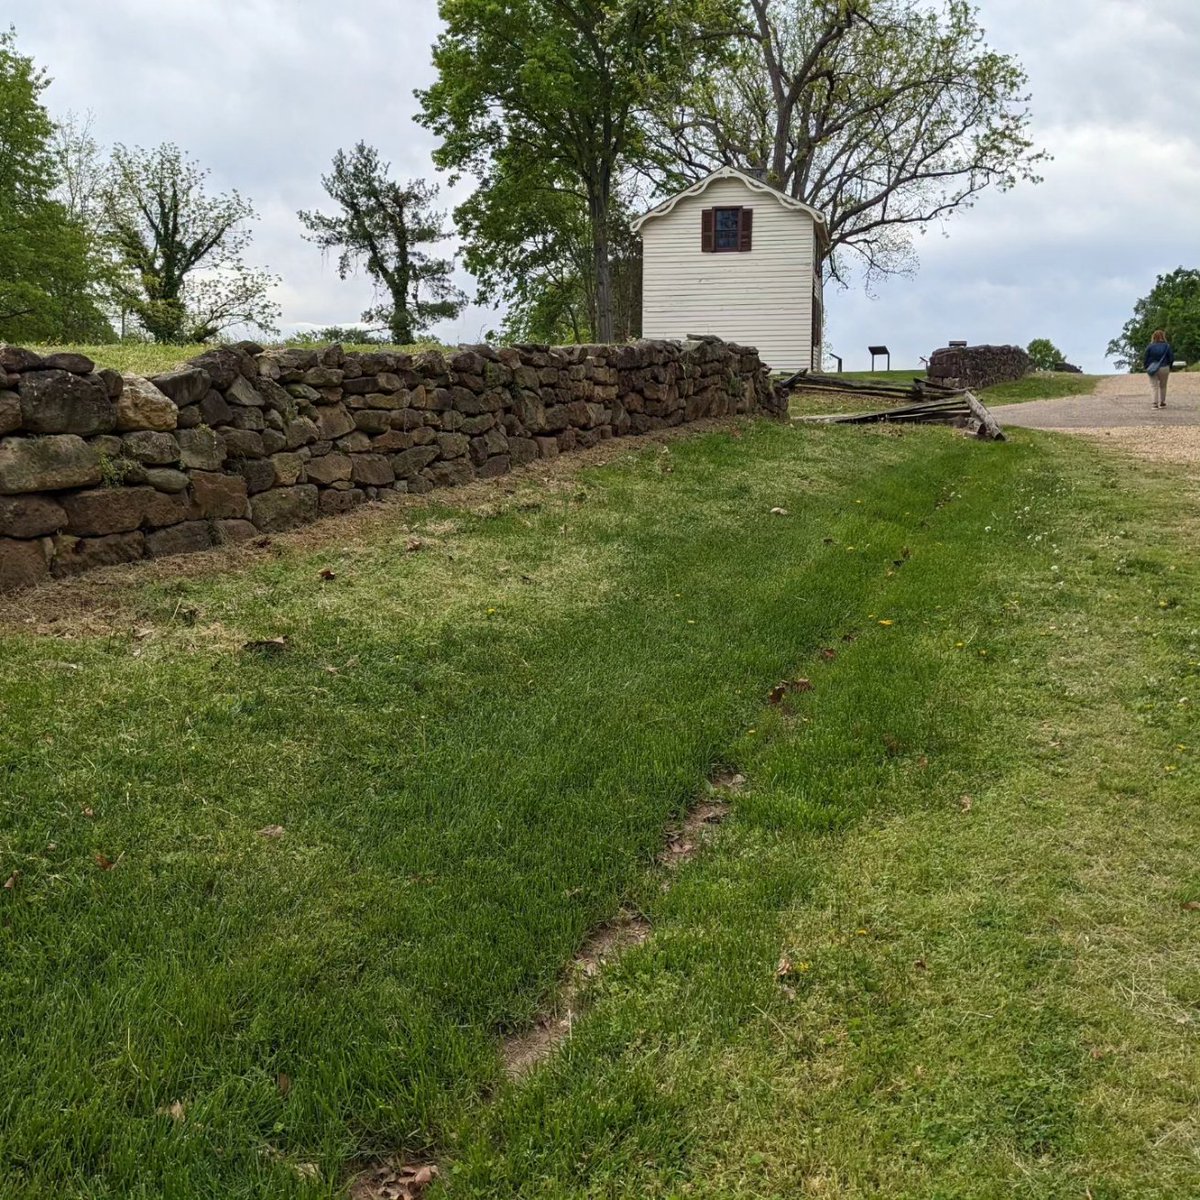 Have you ever been somewhere and suddenly realized you were there a LONG time ago?

Today: a 50 YEAR deja vu! I visited a Civil War battlefield today, realized I was there when I was 10 years old with my Dad.  The place? 'The Sunken Road' at Fredericksburg. 

How crazy is that?